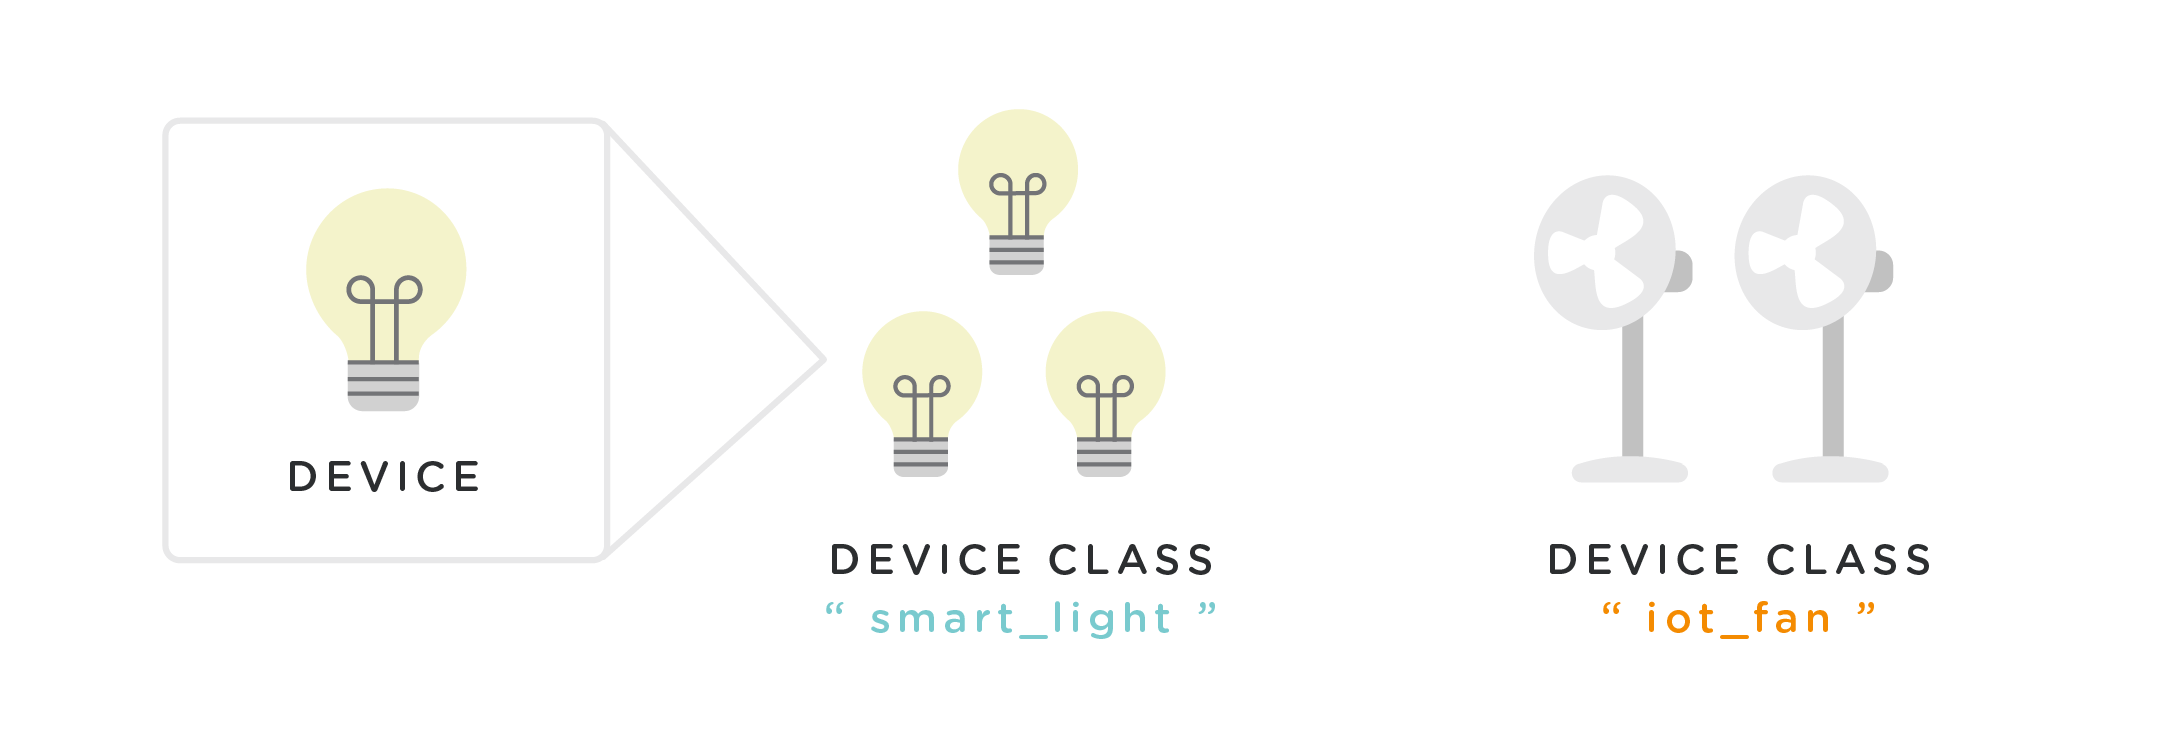 Diagram - Device and Device Classes